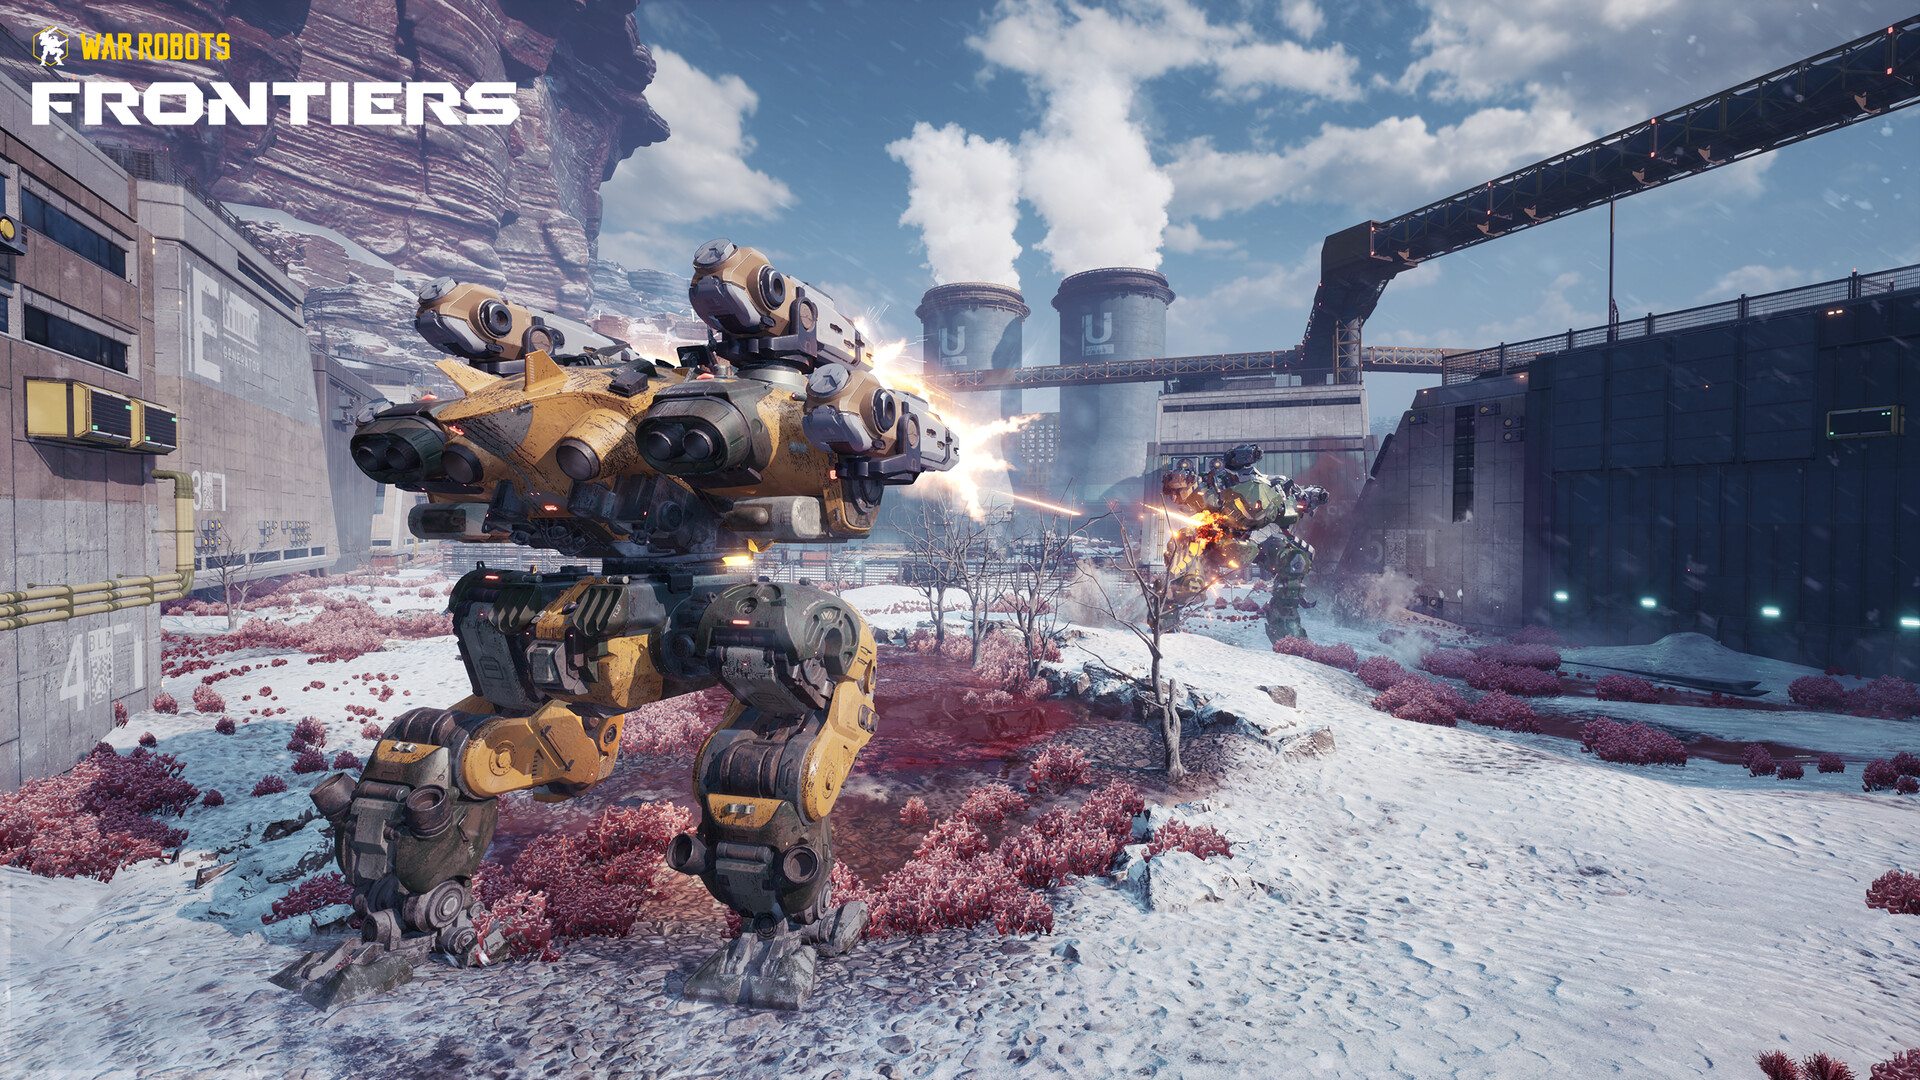 It's Official: War Robots Is More Than Just One Game